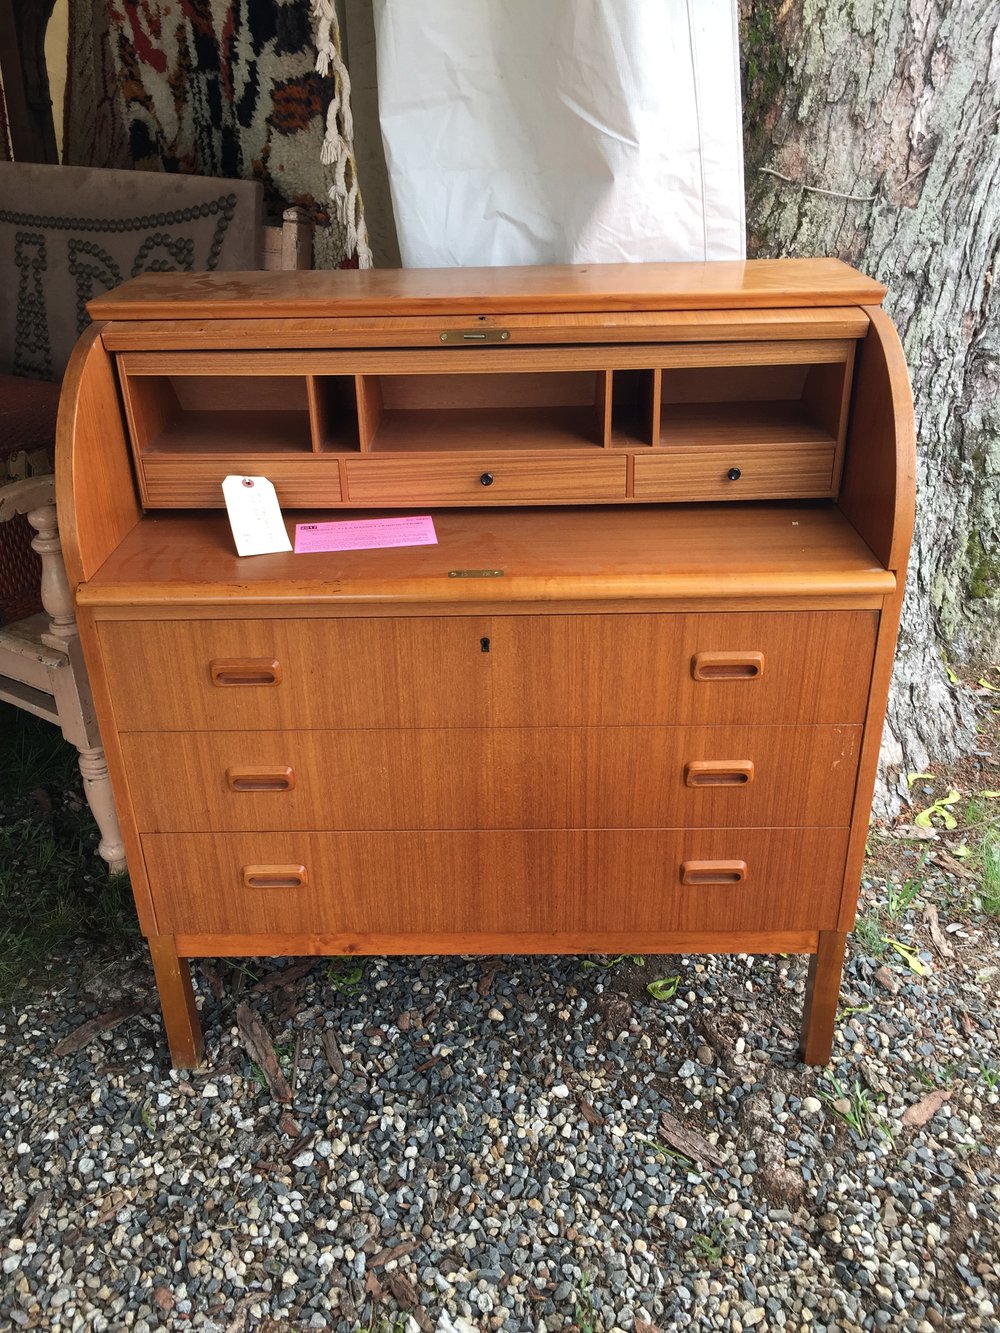  A mid-century roll desk. I've never seen one and I really, REALLY want to figure out a way to get one of these into my house. &nbsp;But right now, there's just no room. 